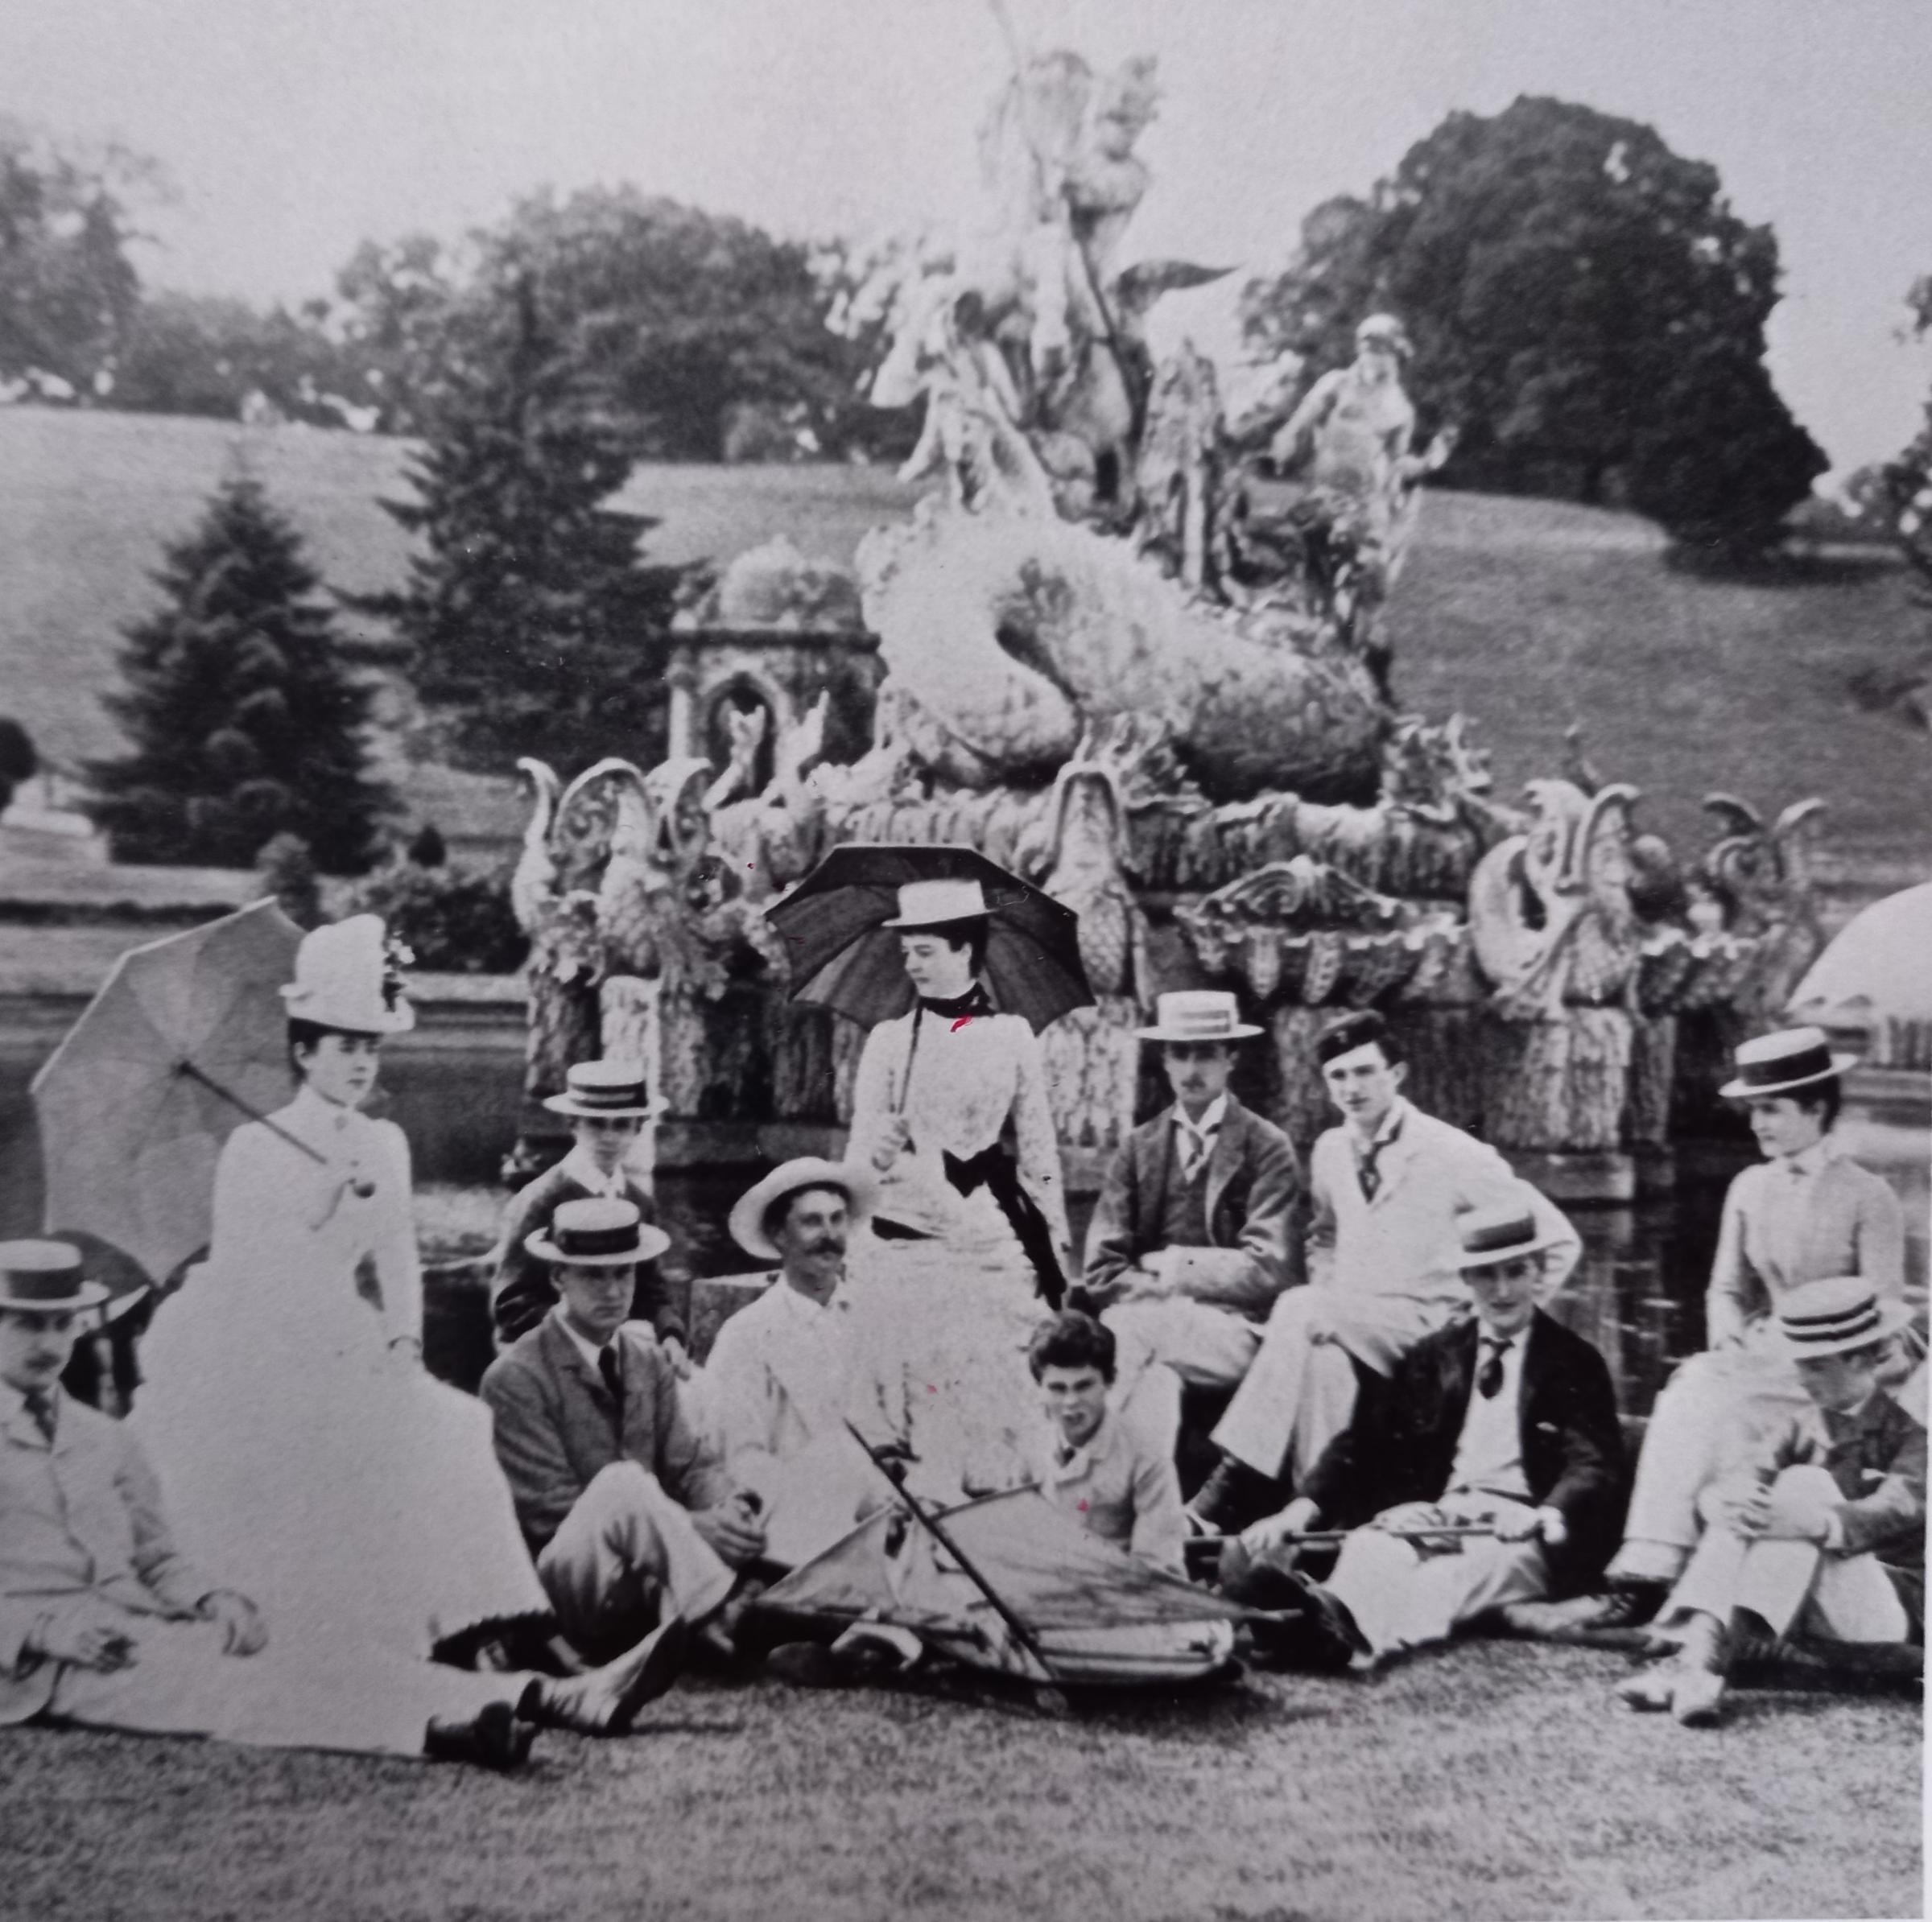 The Countess of Dudley with family and friends at Witley Court in 1875